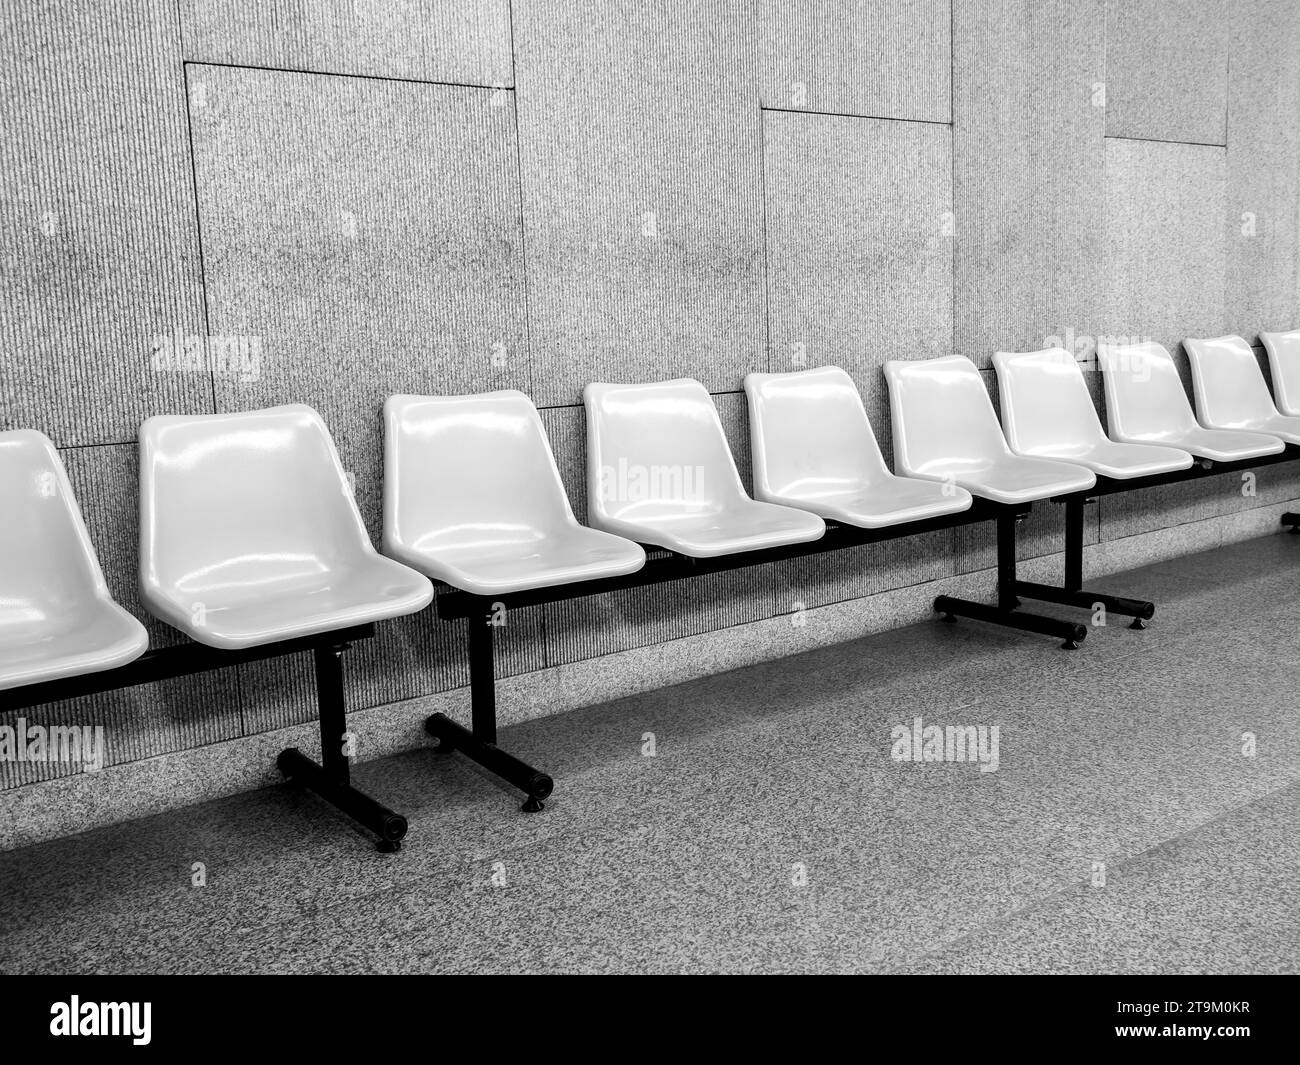 Black and white photo scene of row of empty waiting chair with white plastic seats with black iron legs seats on grey tiles and concrete wall backgrou Stock Photo